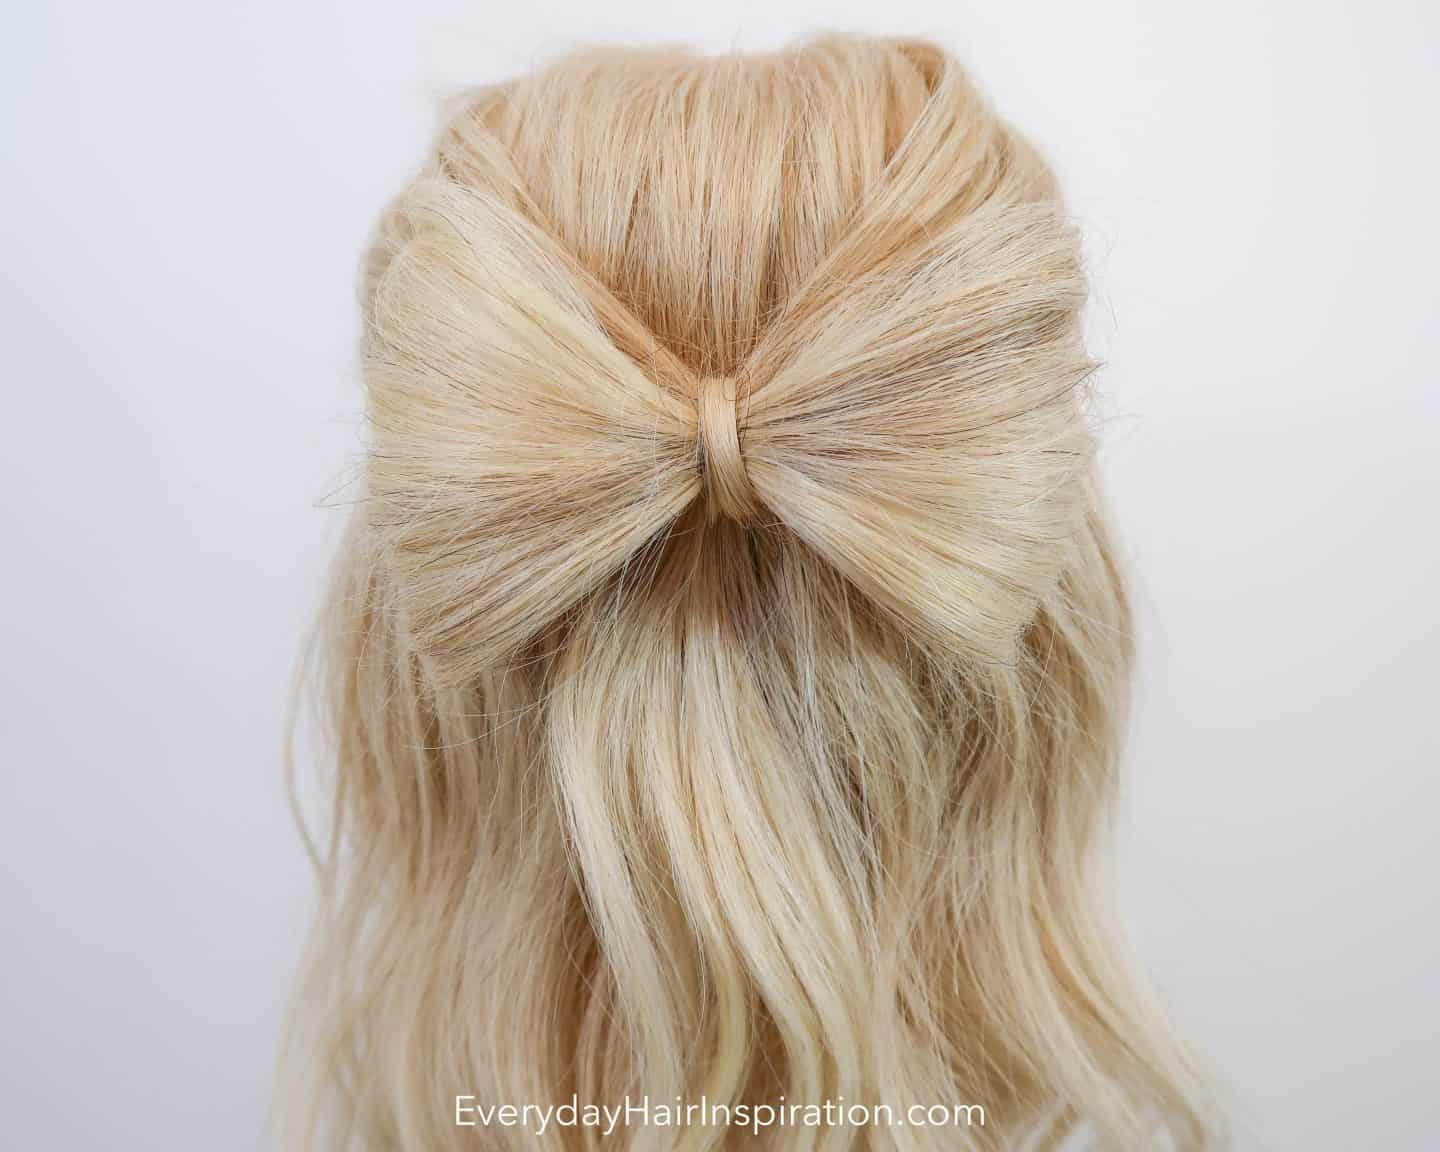 Trending – Bow Hairstyles For Brides We Are Loving As #Bowcore Takes Over!  | WedMeGood